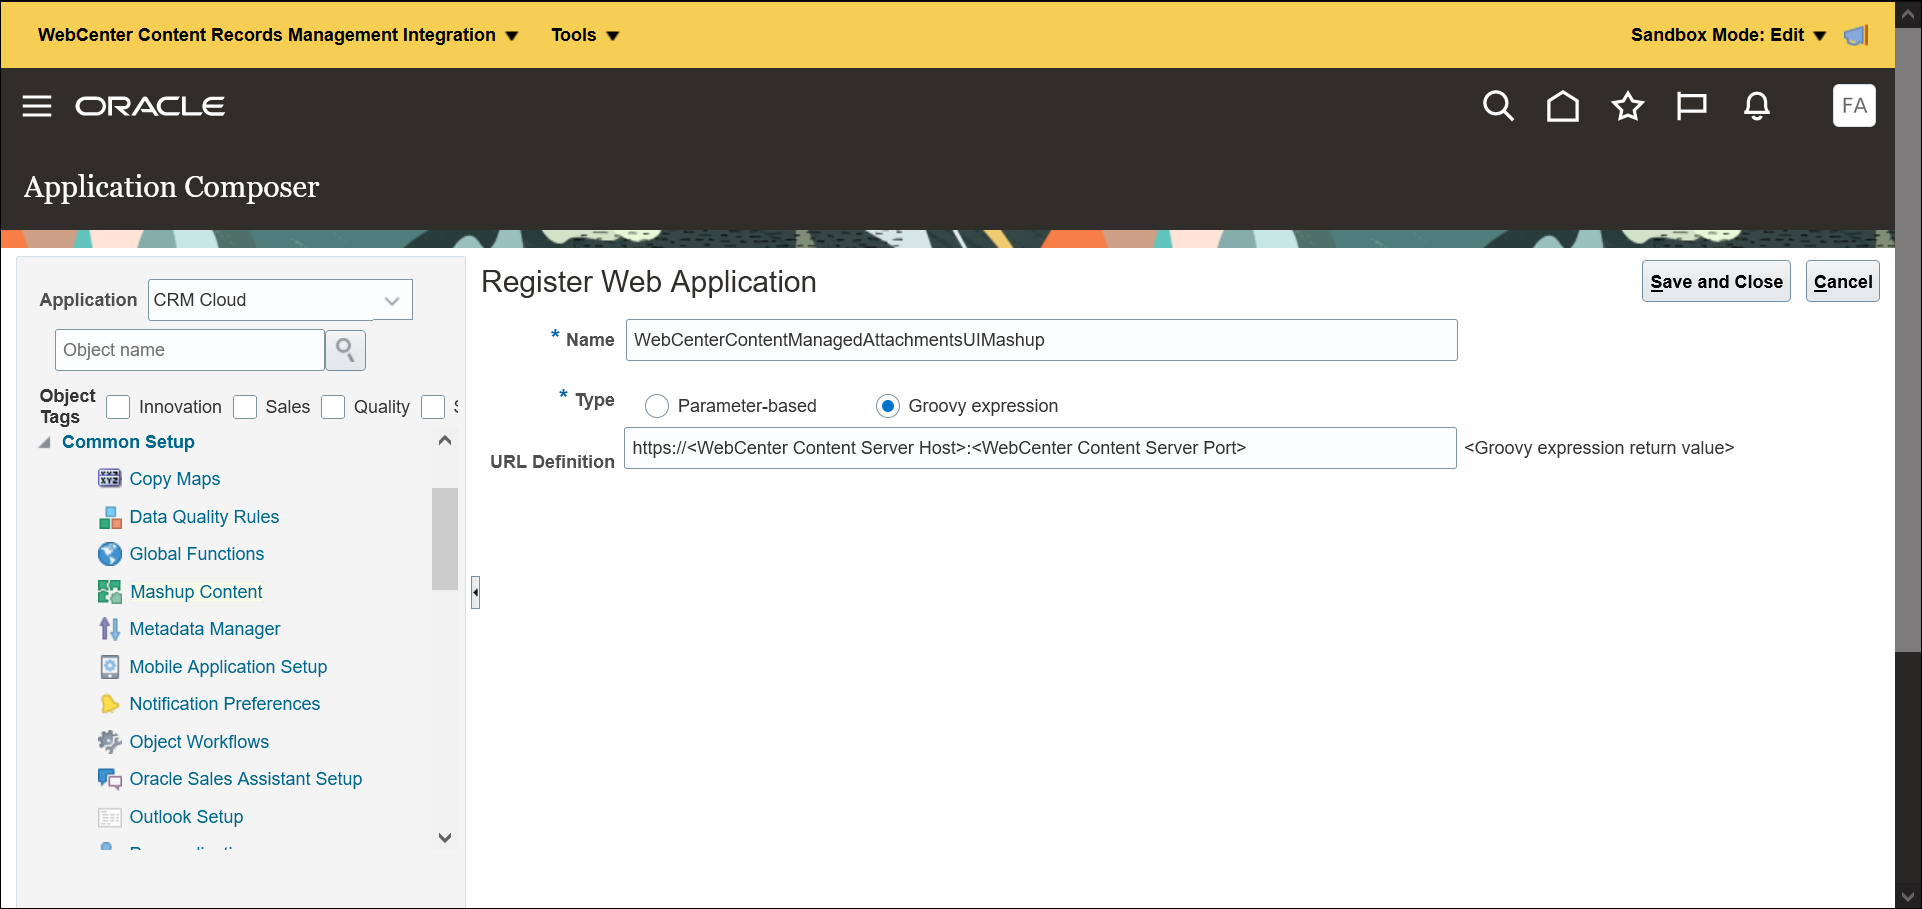 The image shows the Register Web Application page with fields such as Name, Type, and URL Definition.